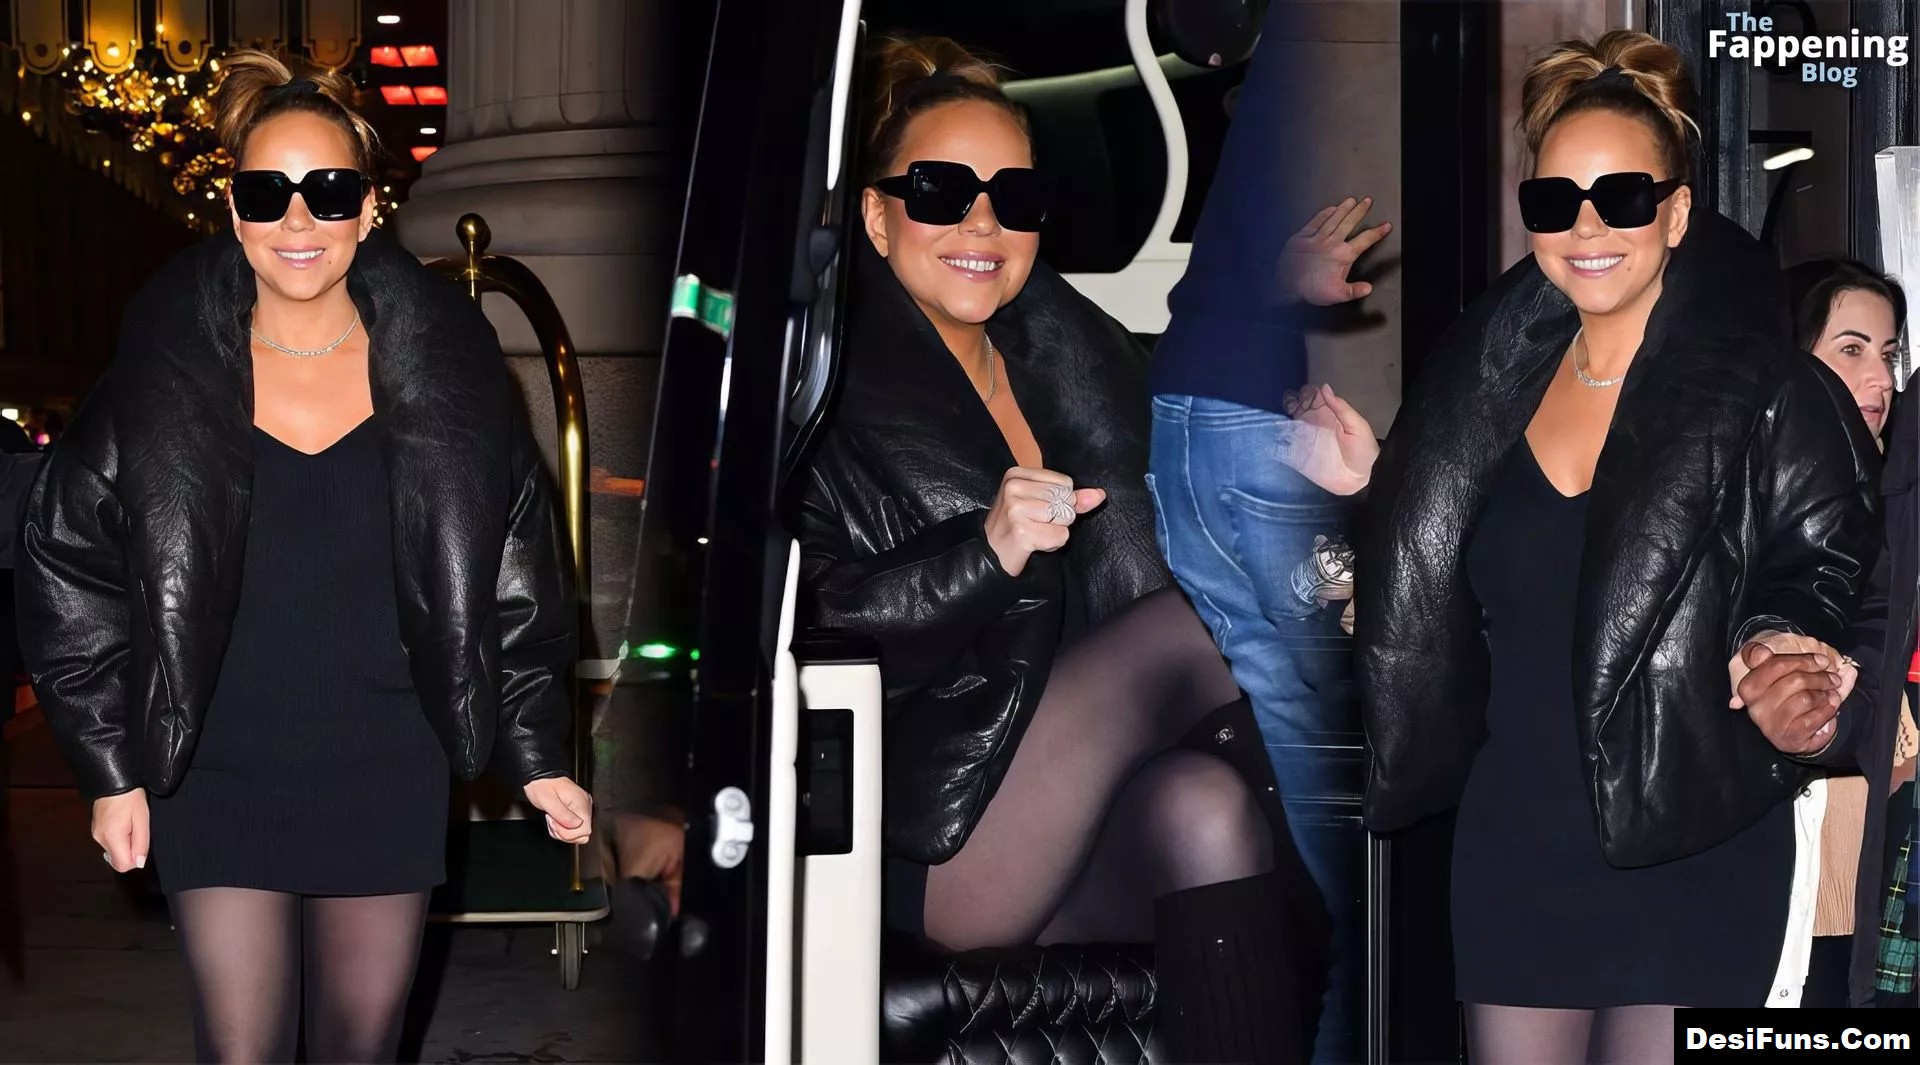 Mariah Carey Looks Sexy in a Black Dress as She Departs a Recording Studio in NY (32 Photos) 